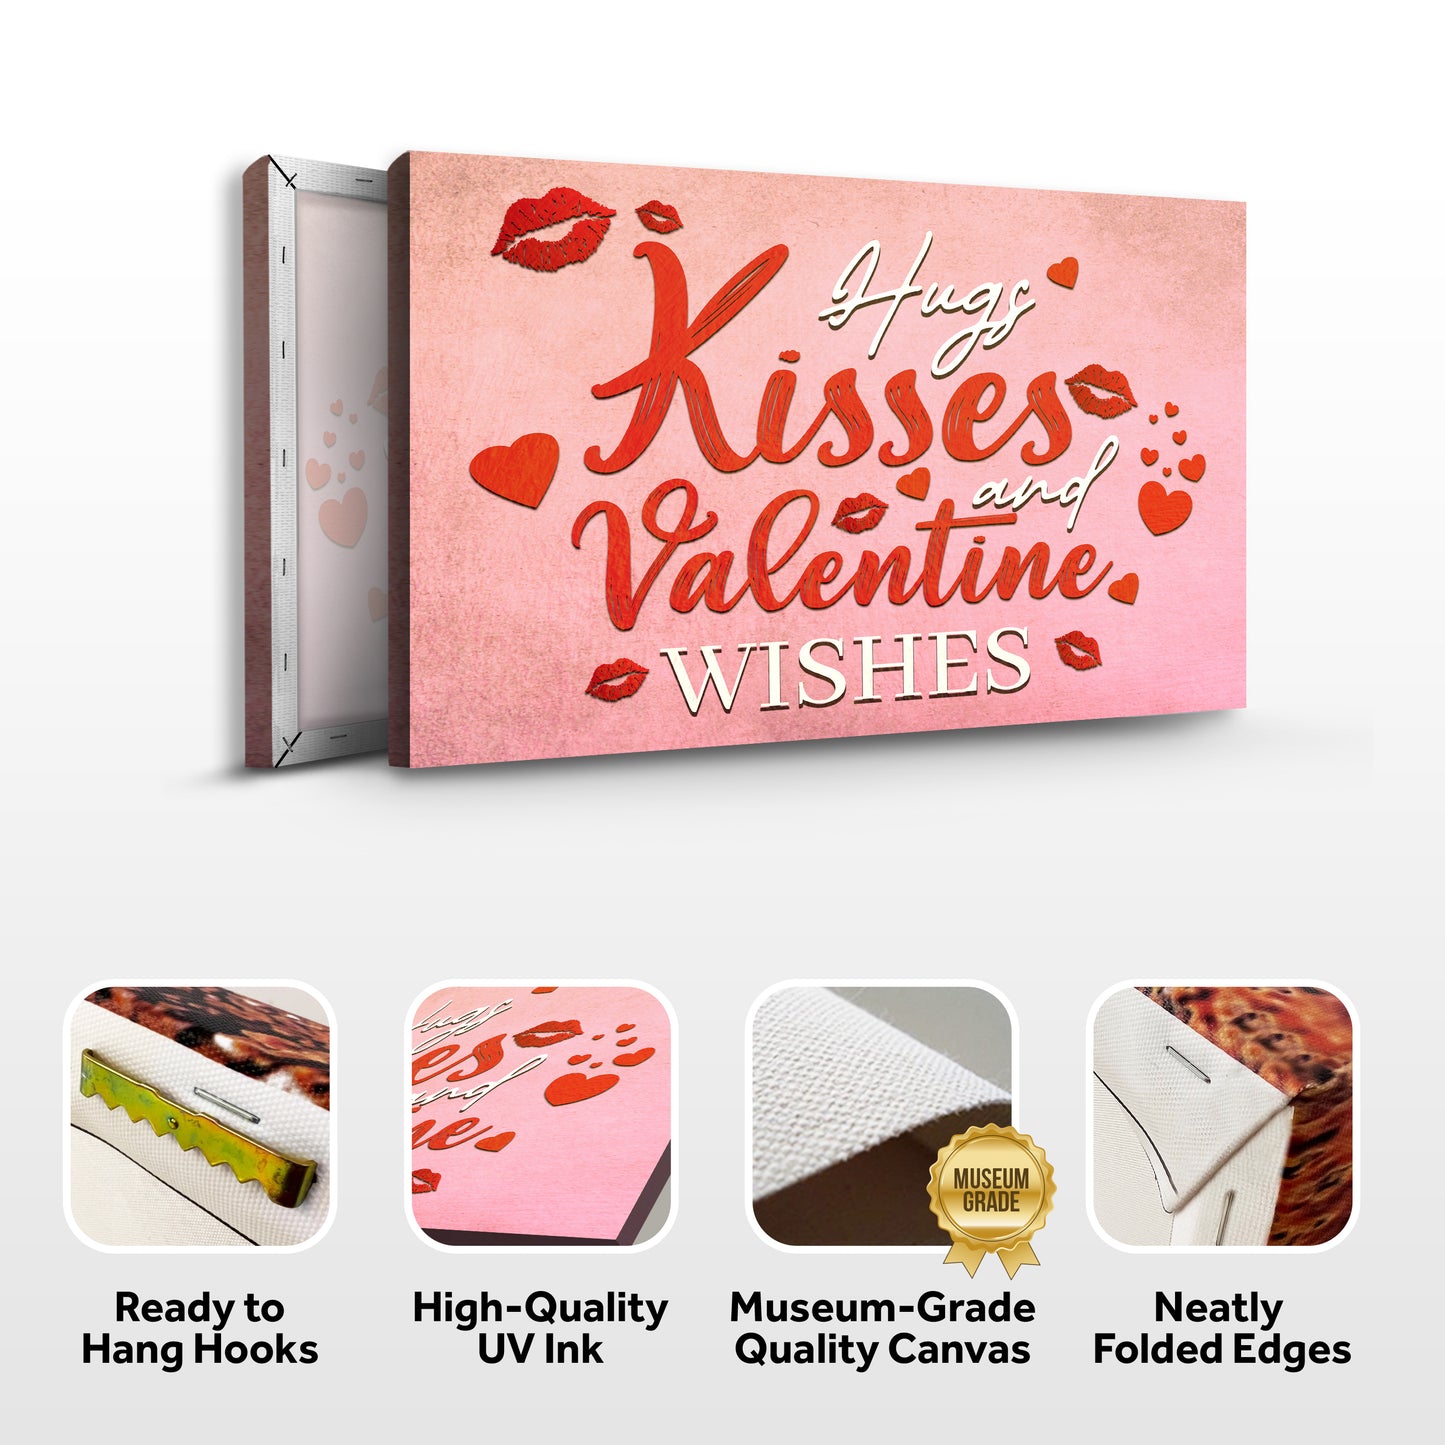 Hugs Kisses and Valentine Wishes Sign II